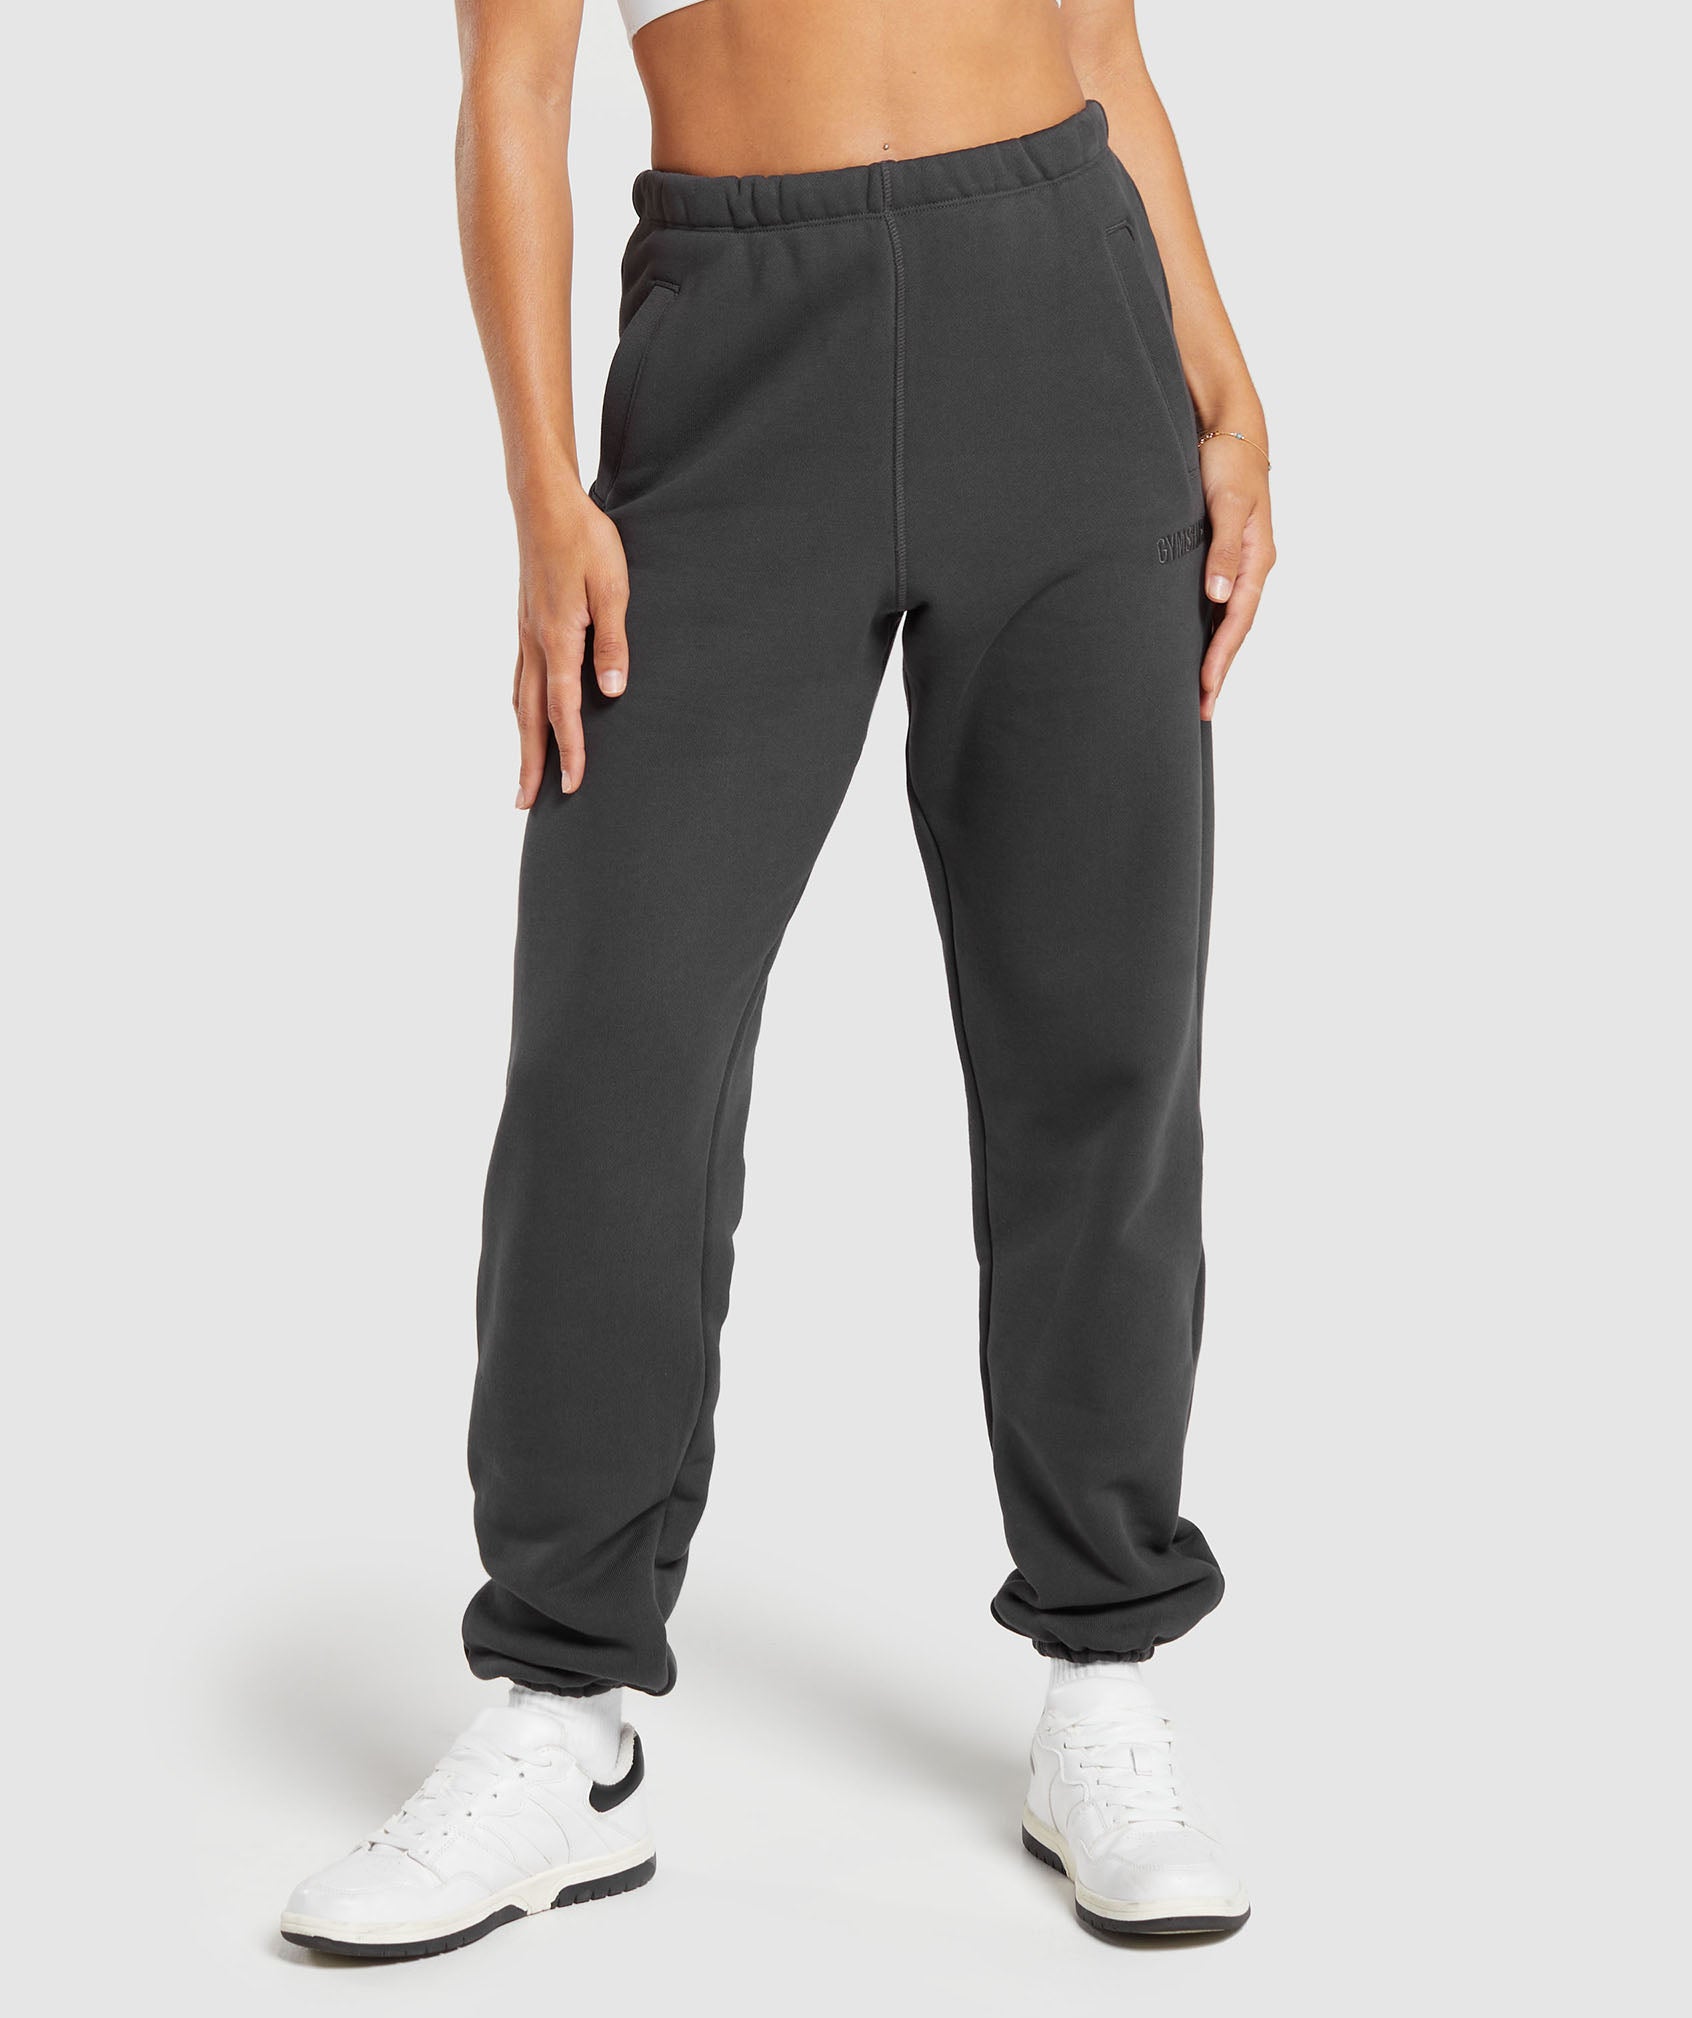 Gymshark Pause Knitwear Joggers - Cement Brown/Pebble Grey